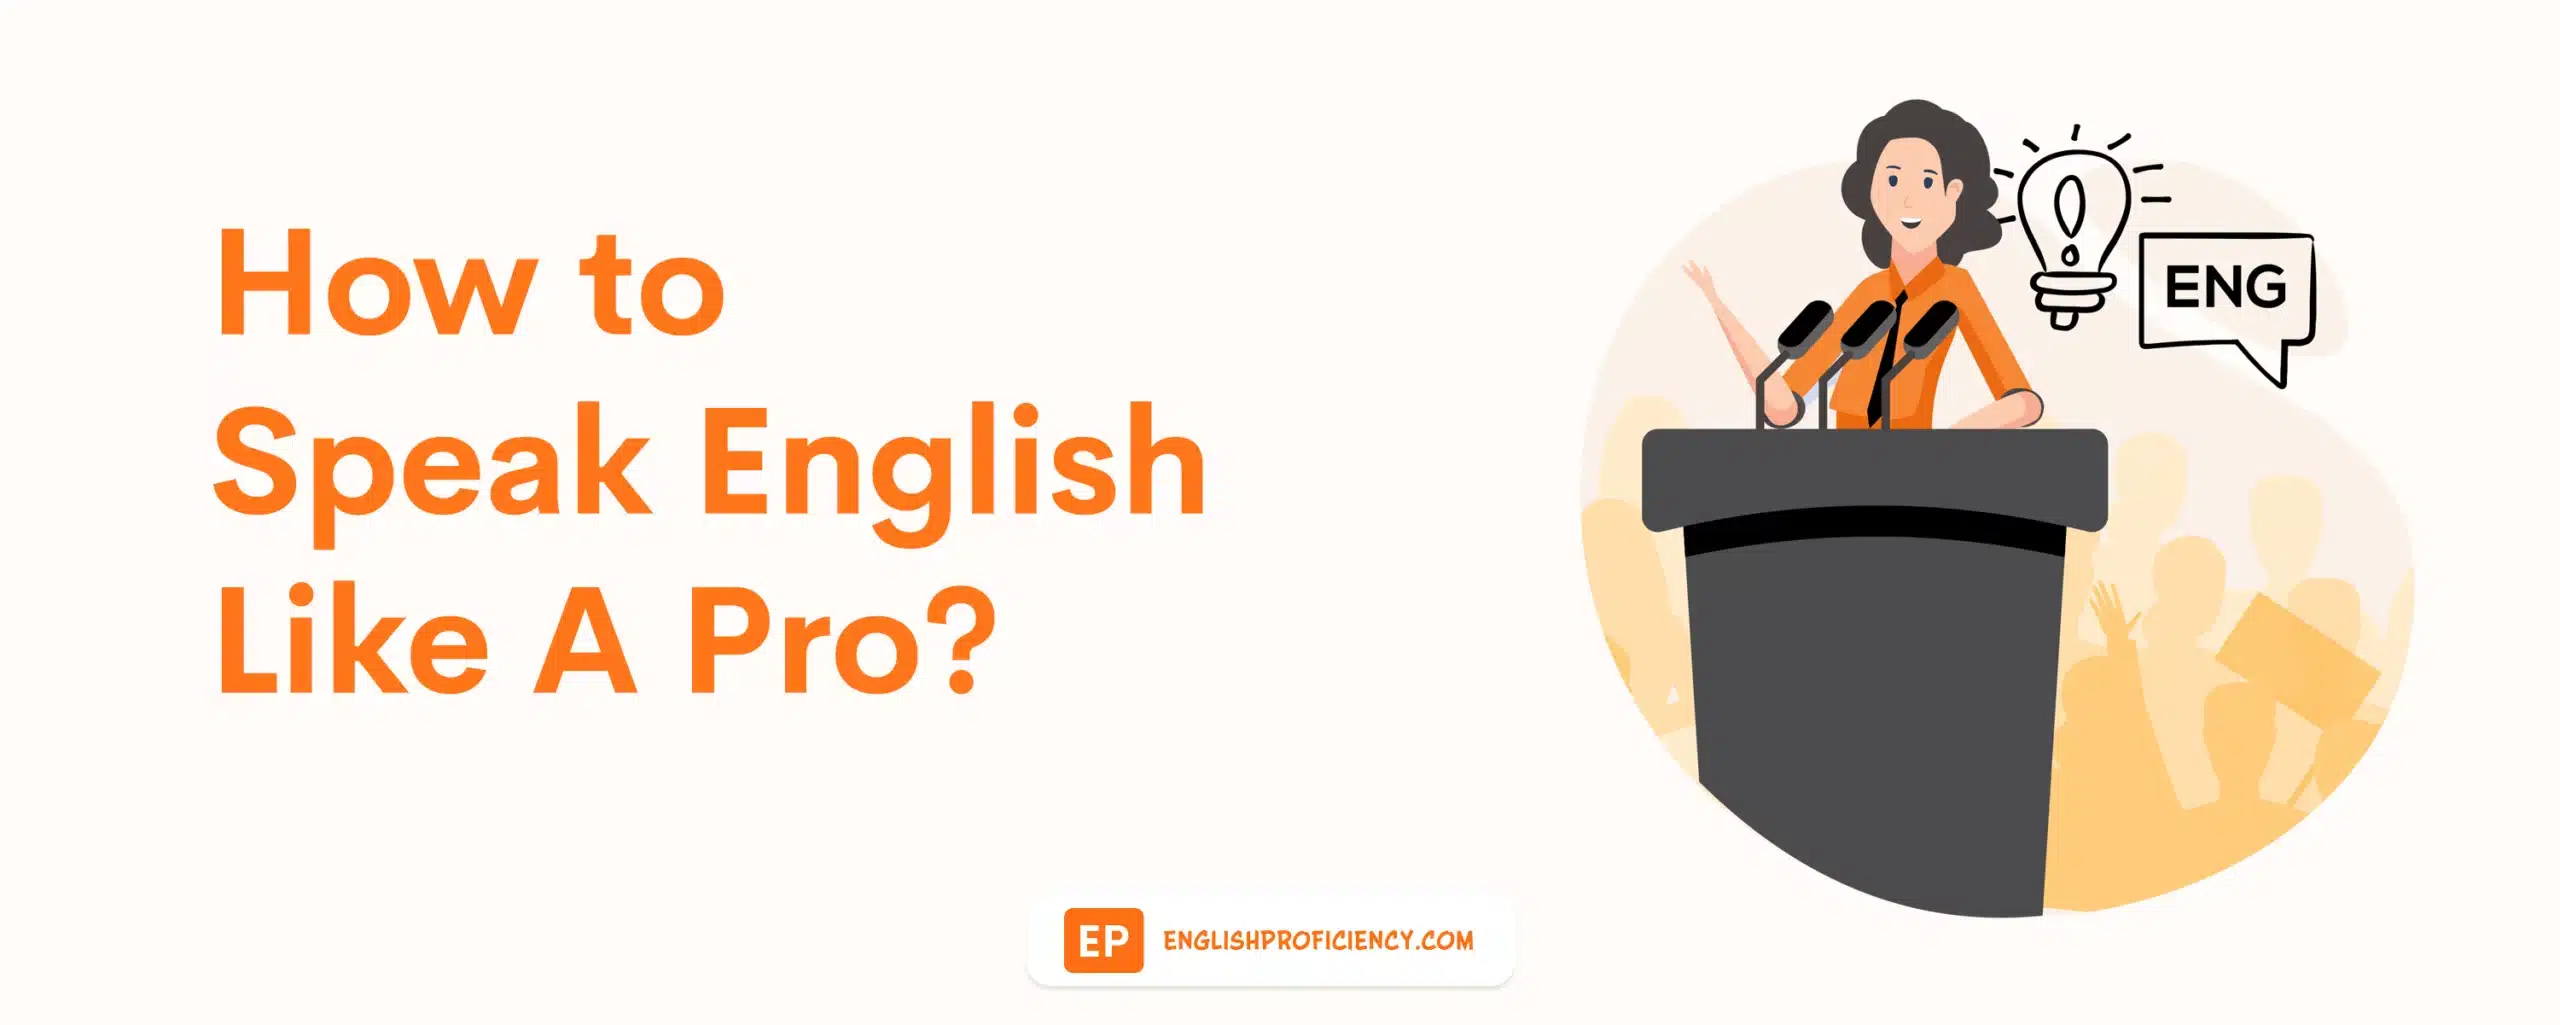 How to Speak English Like A Pro